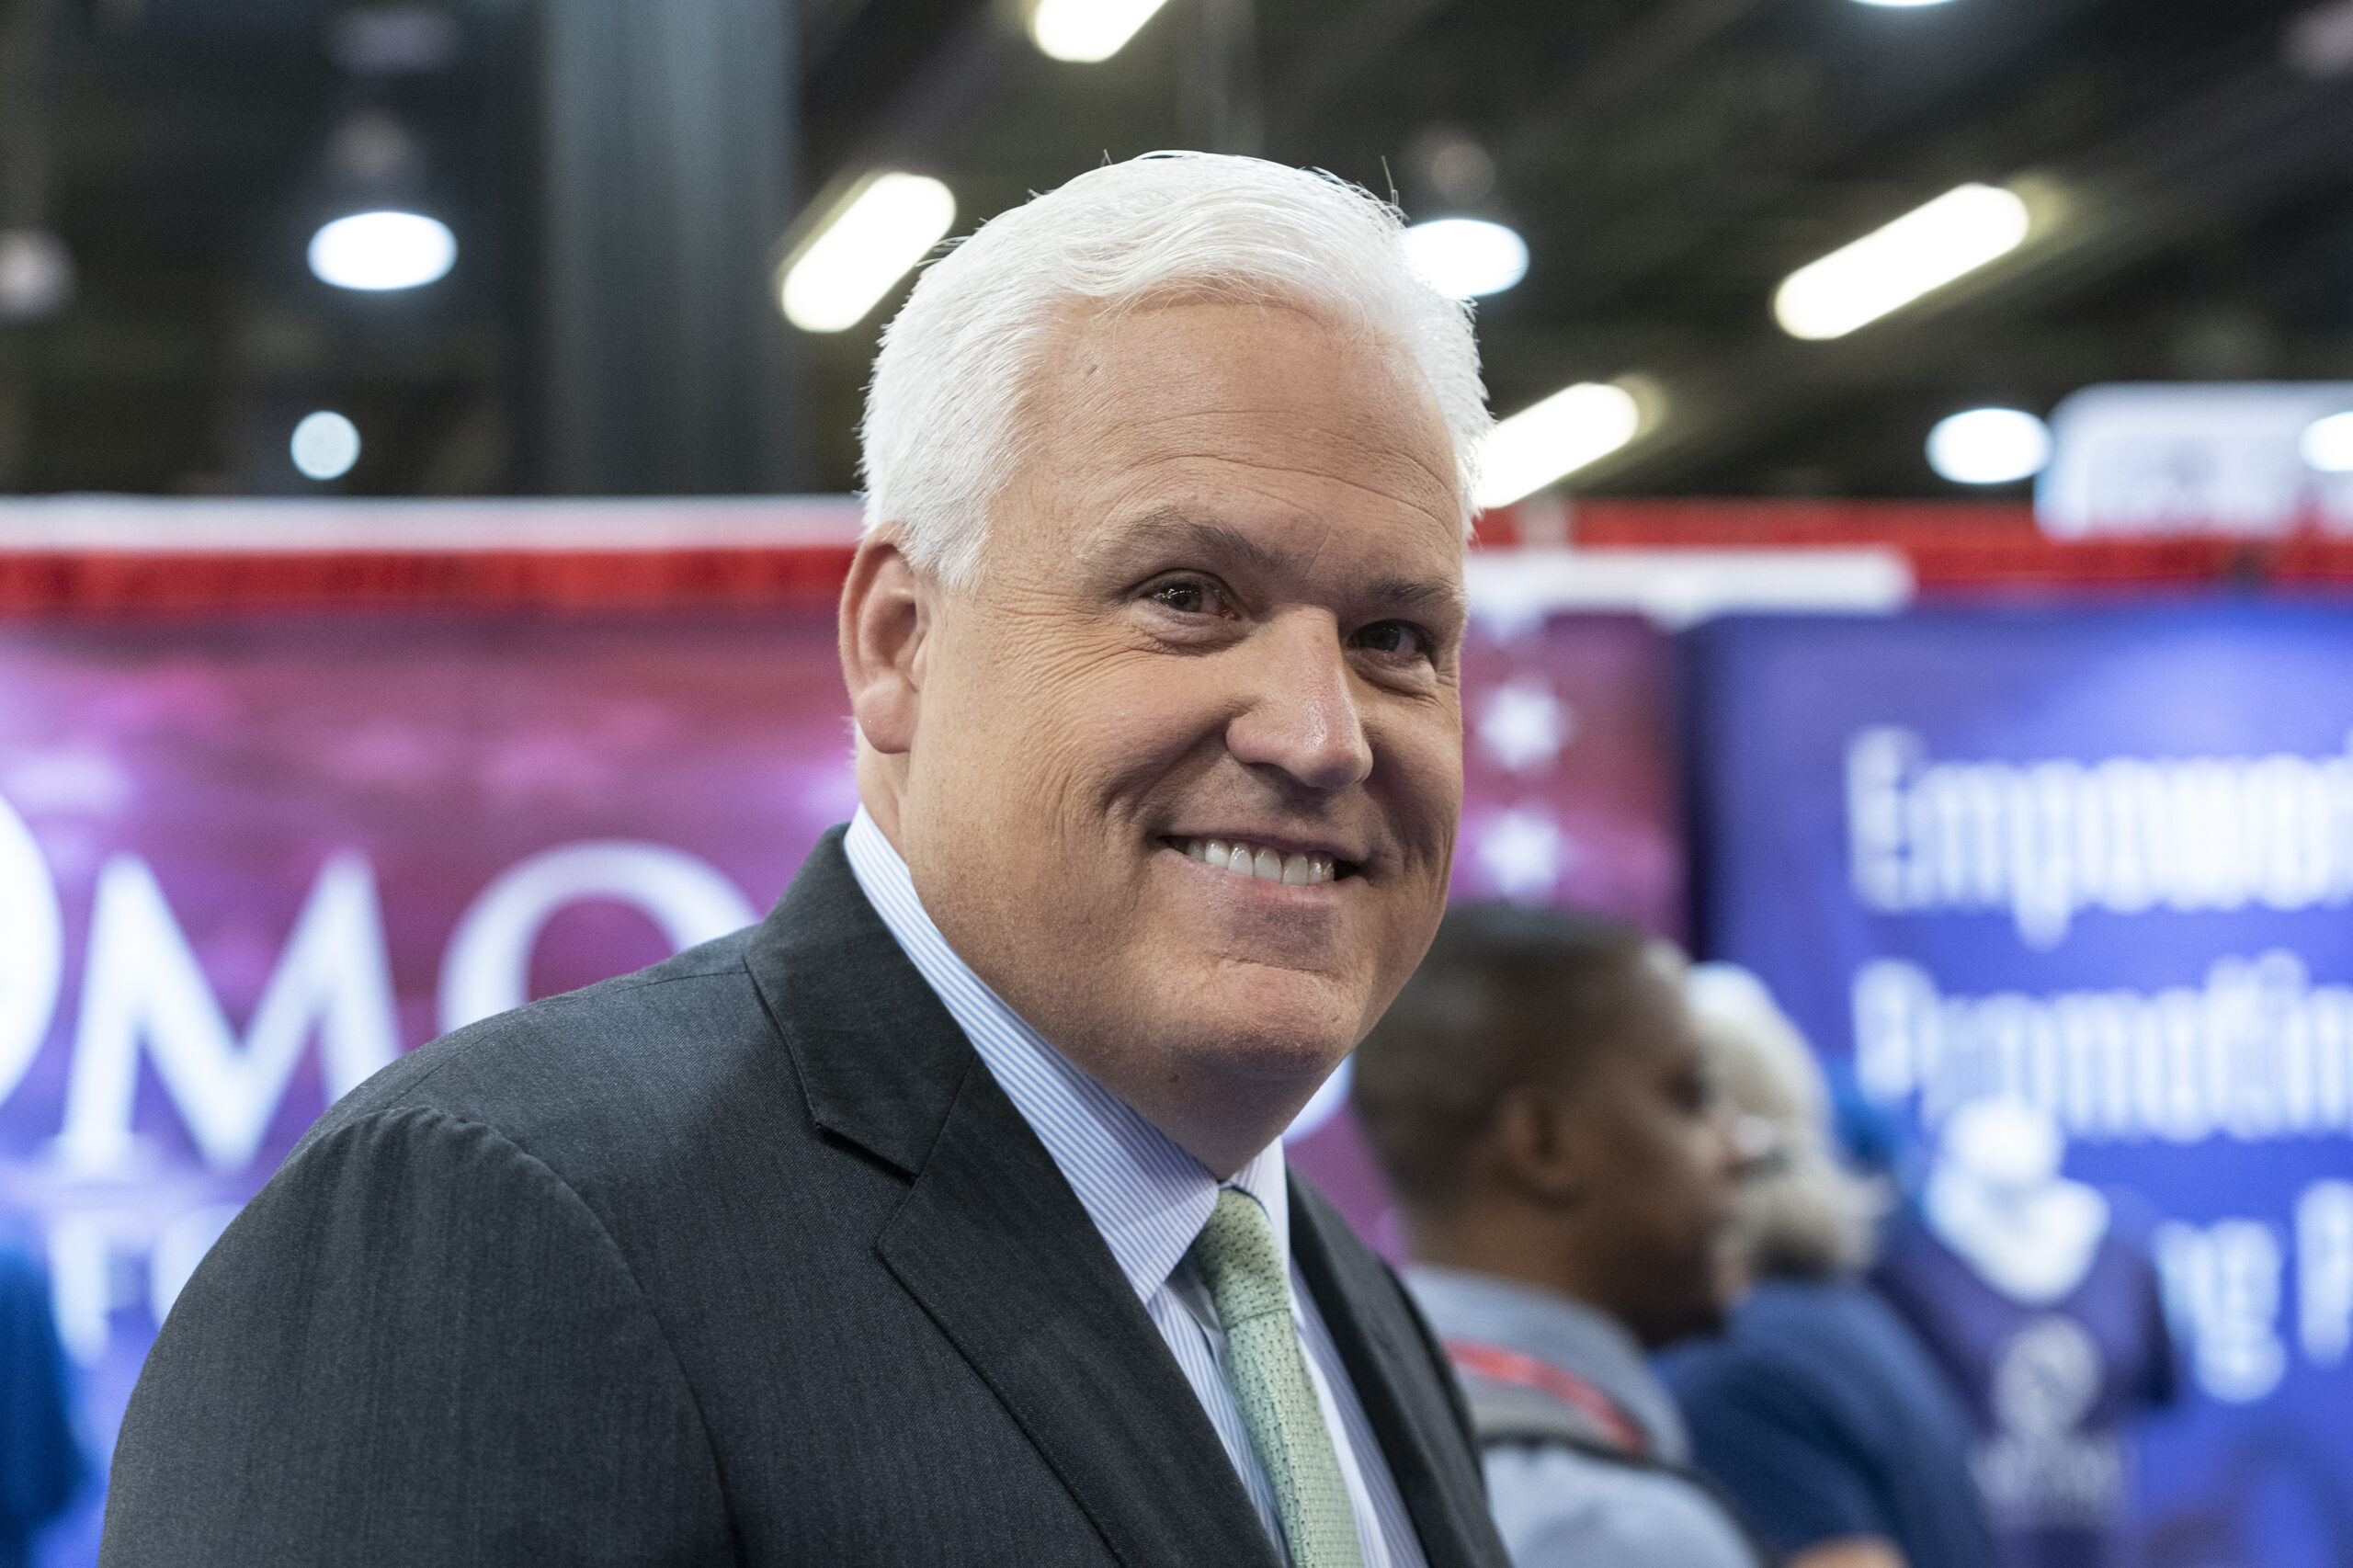 Matt Schlapp Hired Priest to Perform Exorcism at CPAC HQ Following Staff Resignations (mediaite.com)